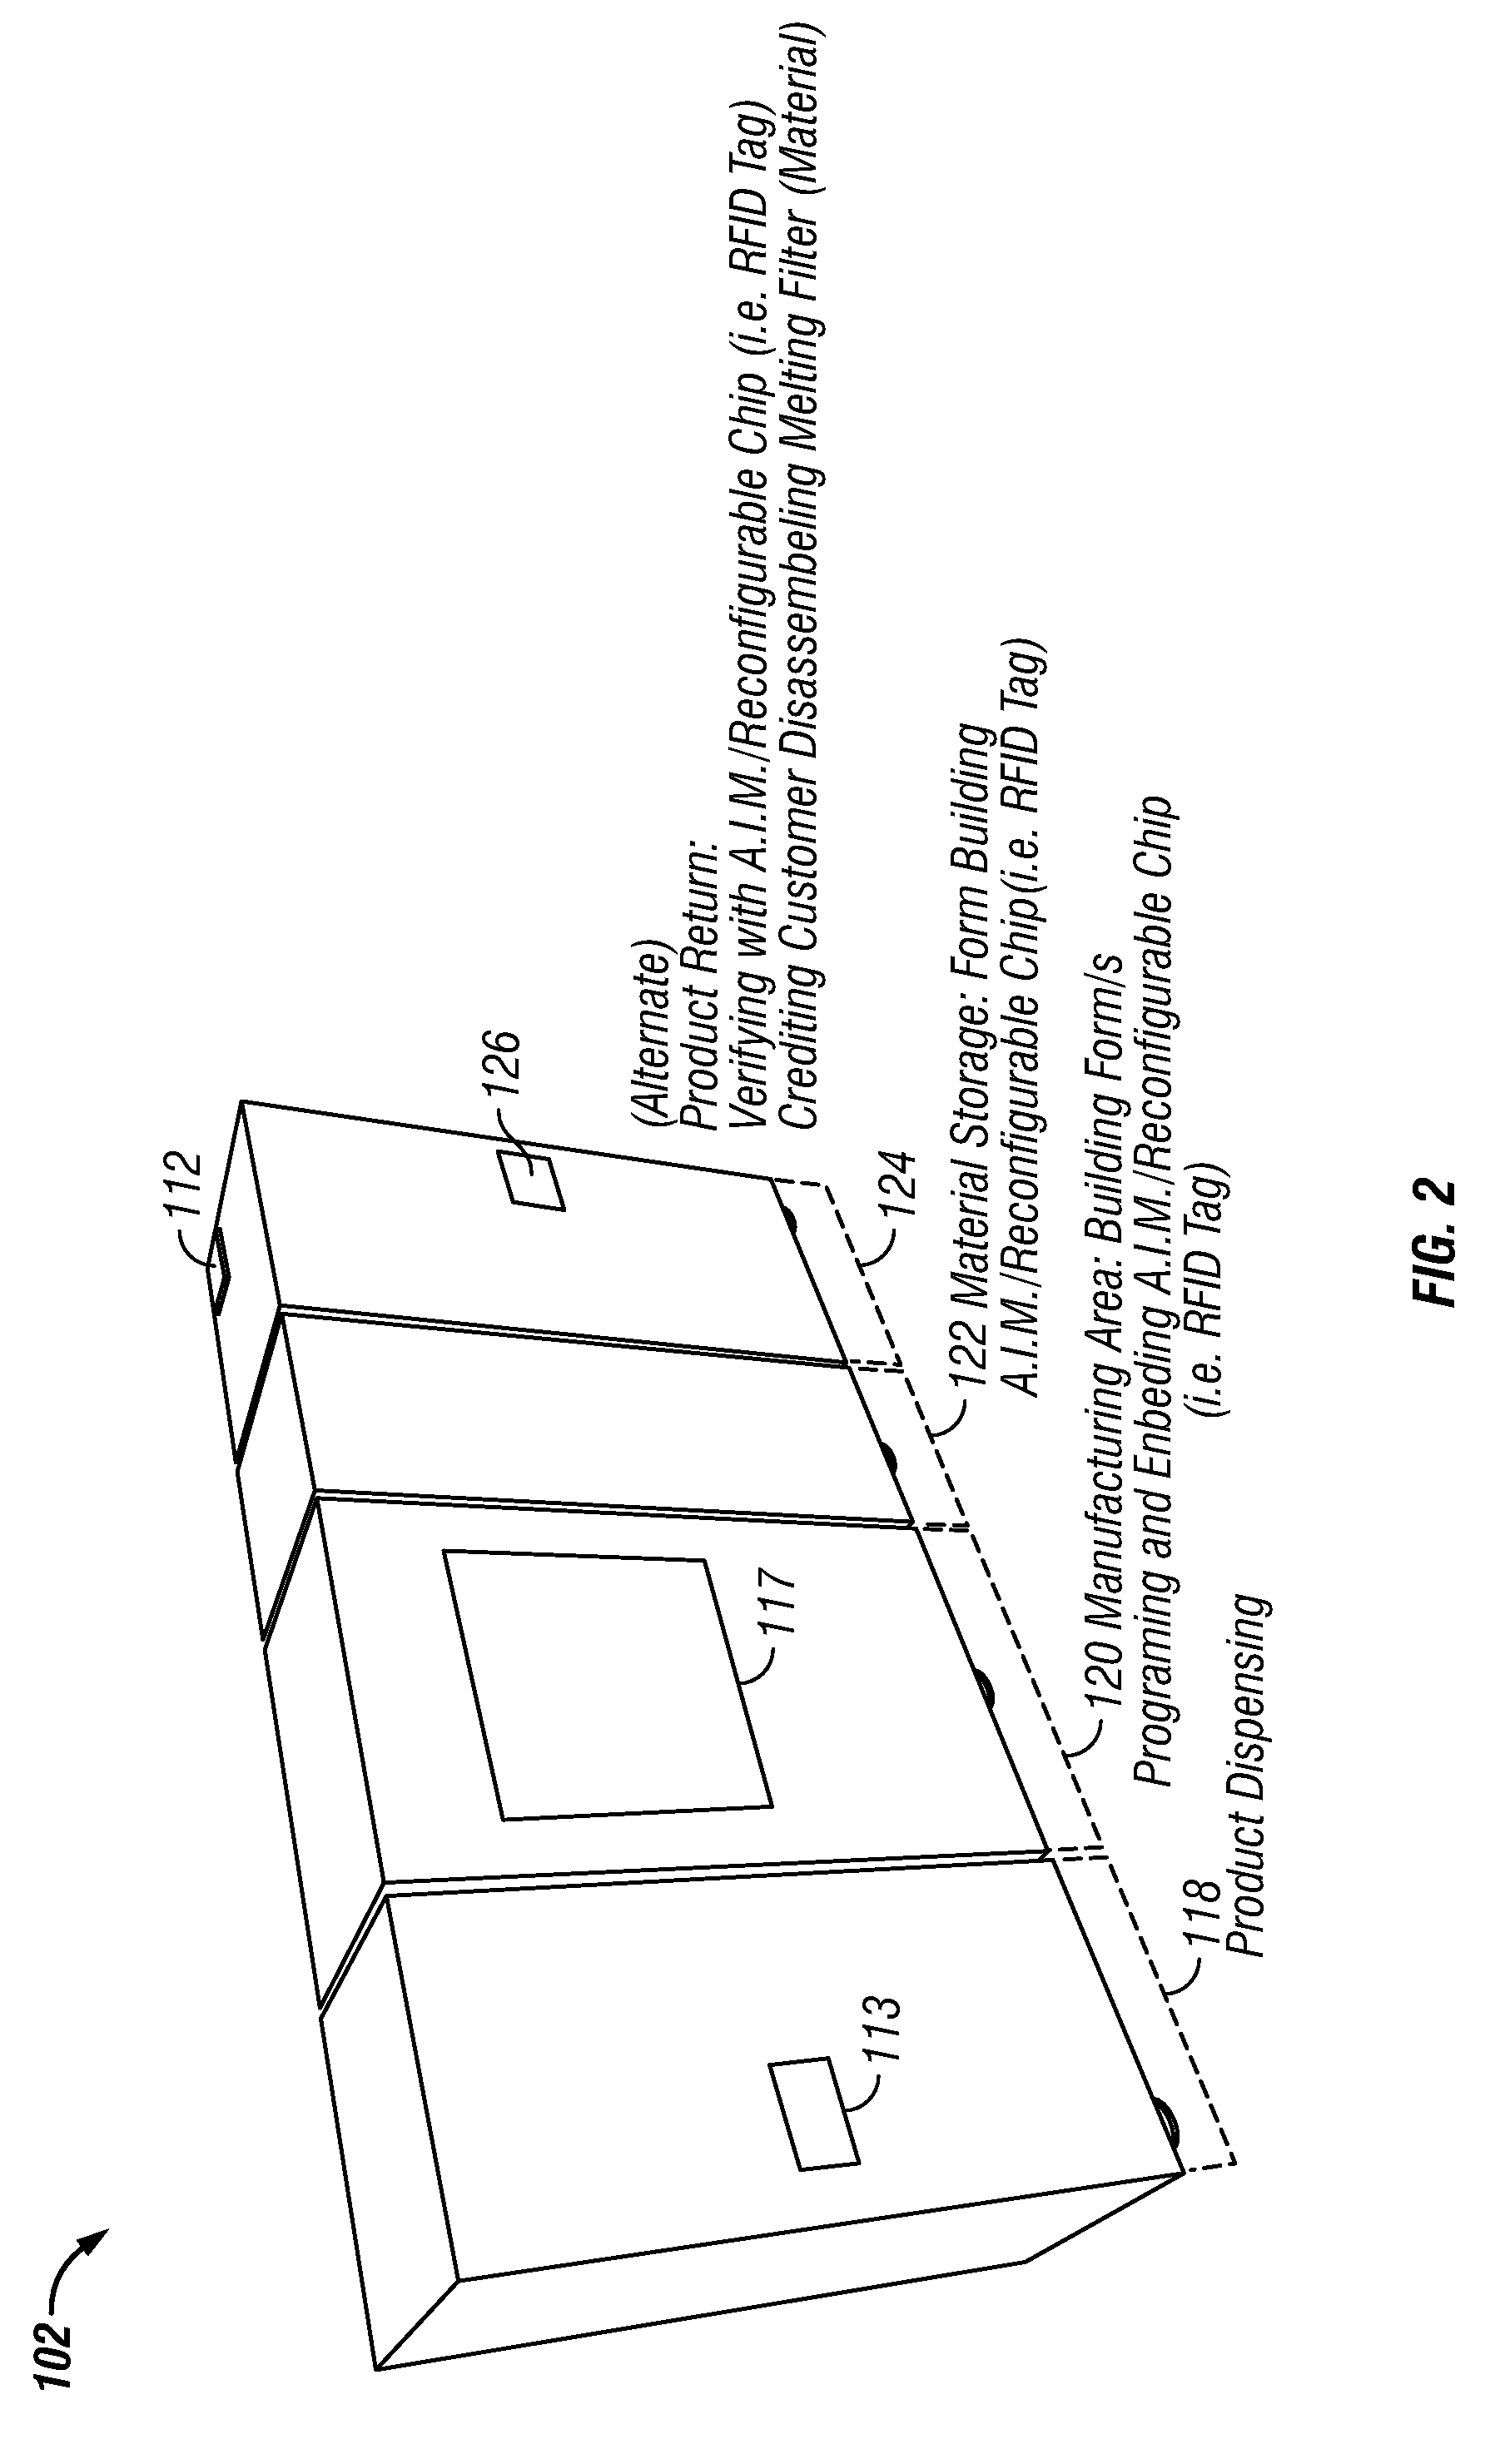 Internet-enabled apparatus, system and methods for physically and virtually rendering three-dimensional objects